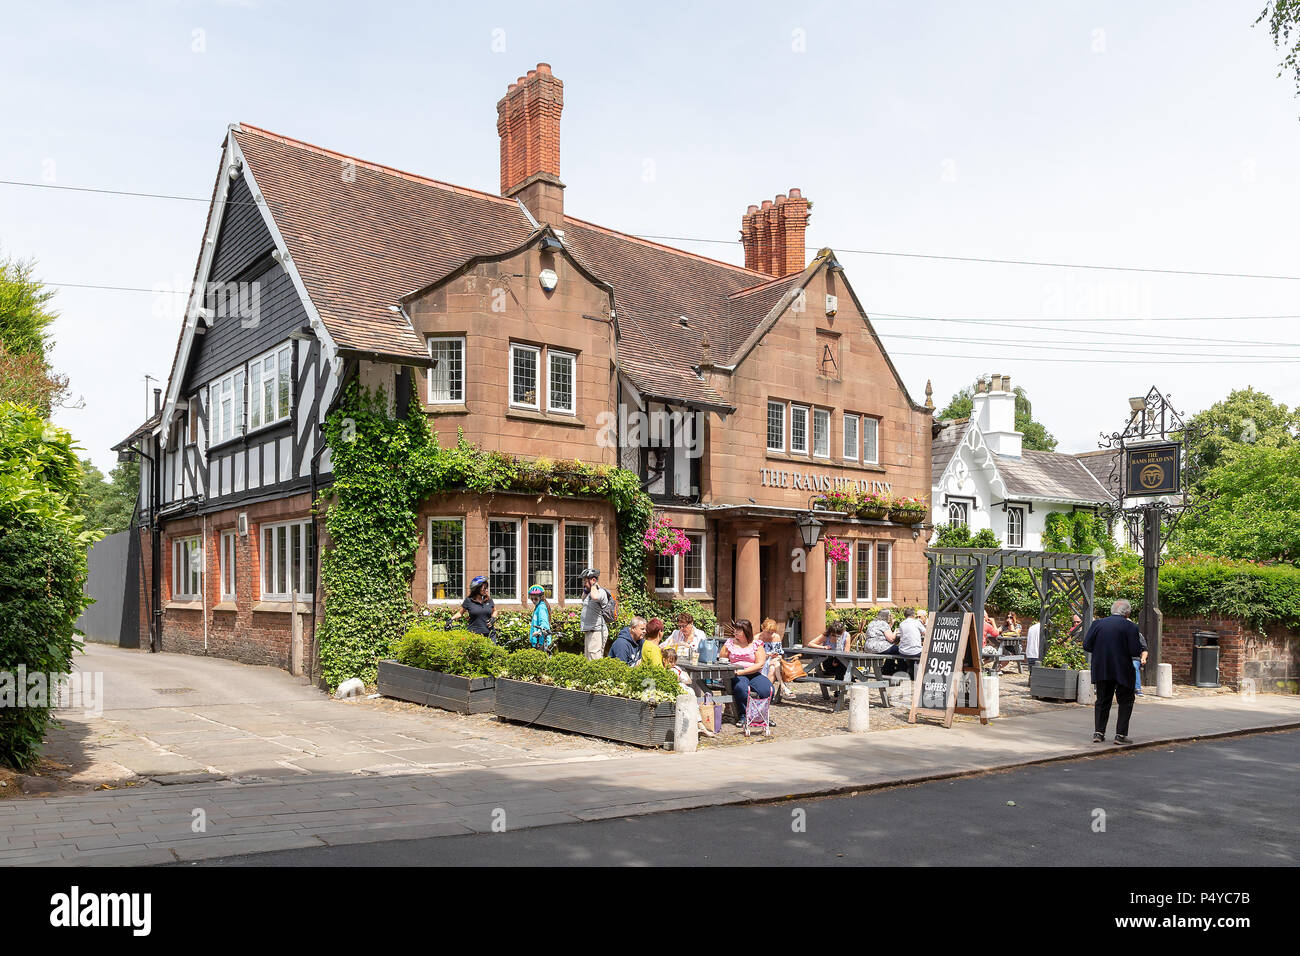 Cheshire, UK. 23rd June 2018. 23 June 2018 - The weather was hot and sunny for Grappenhall Walking Day, Cheshire, England, UK Credit: John Hopkins/Alamy Live News Stock Photo